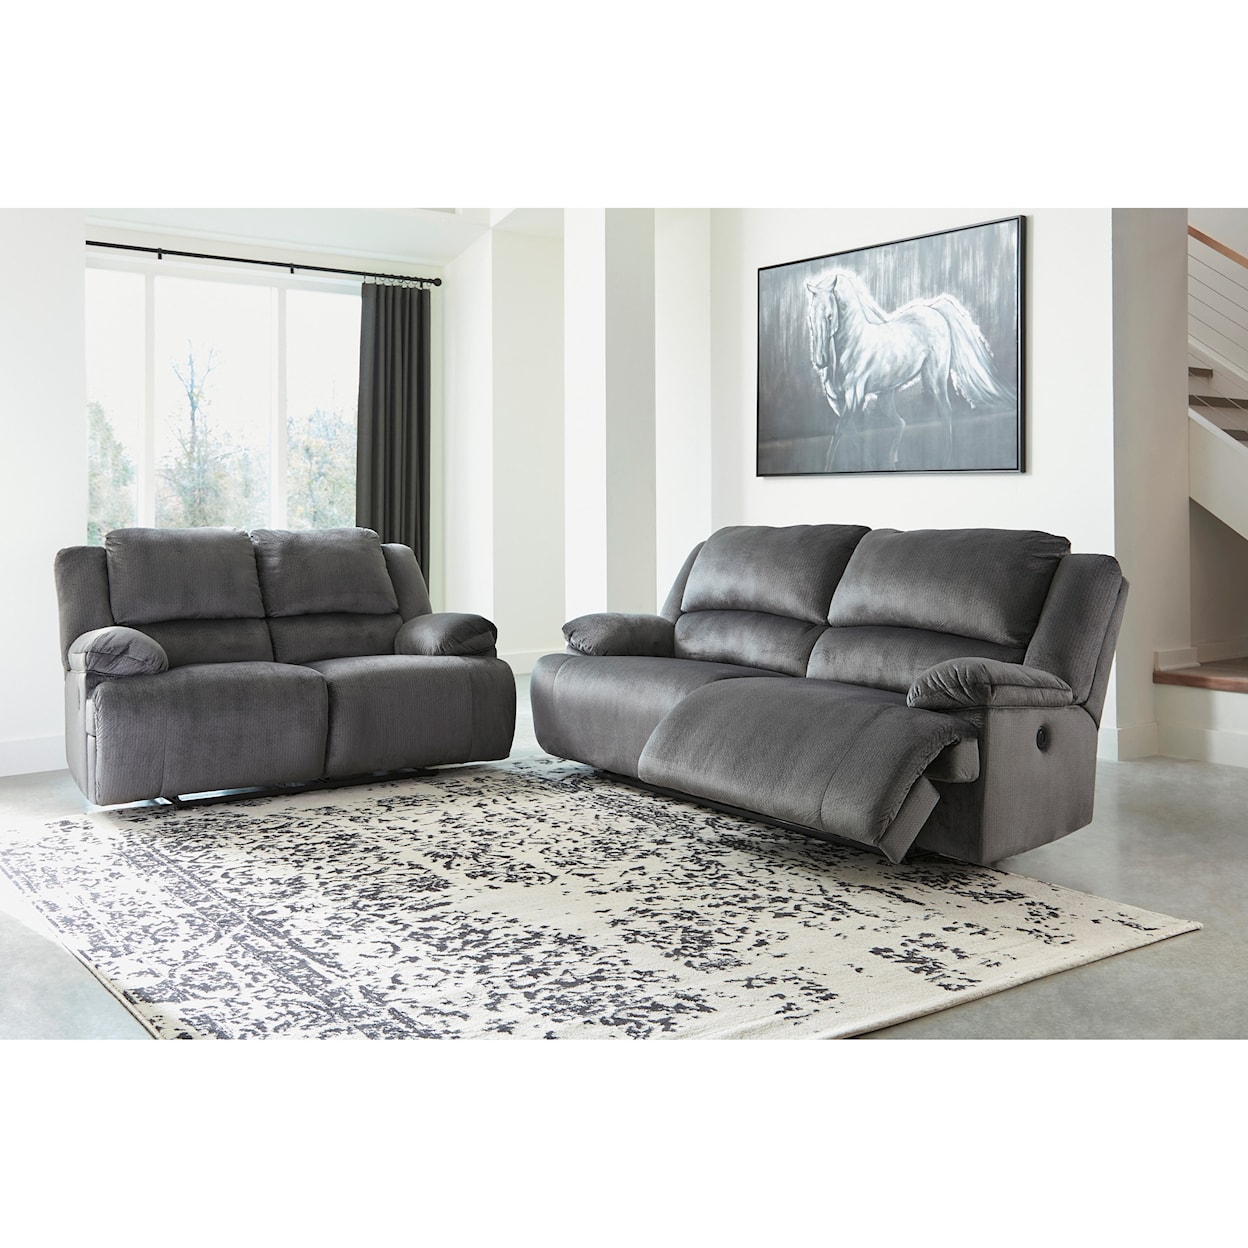 Signature Design by Ashley Clonmel Power Reclining Living Room Group